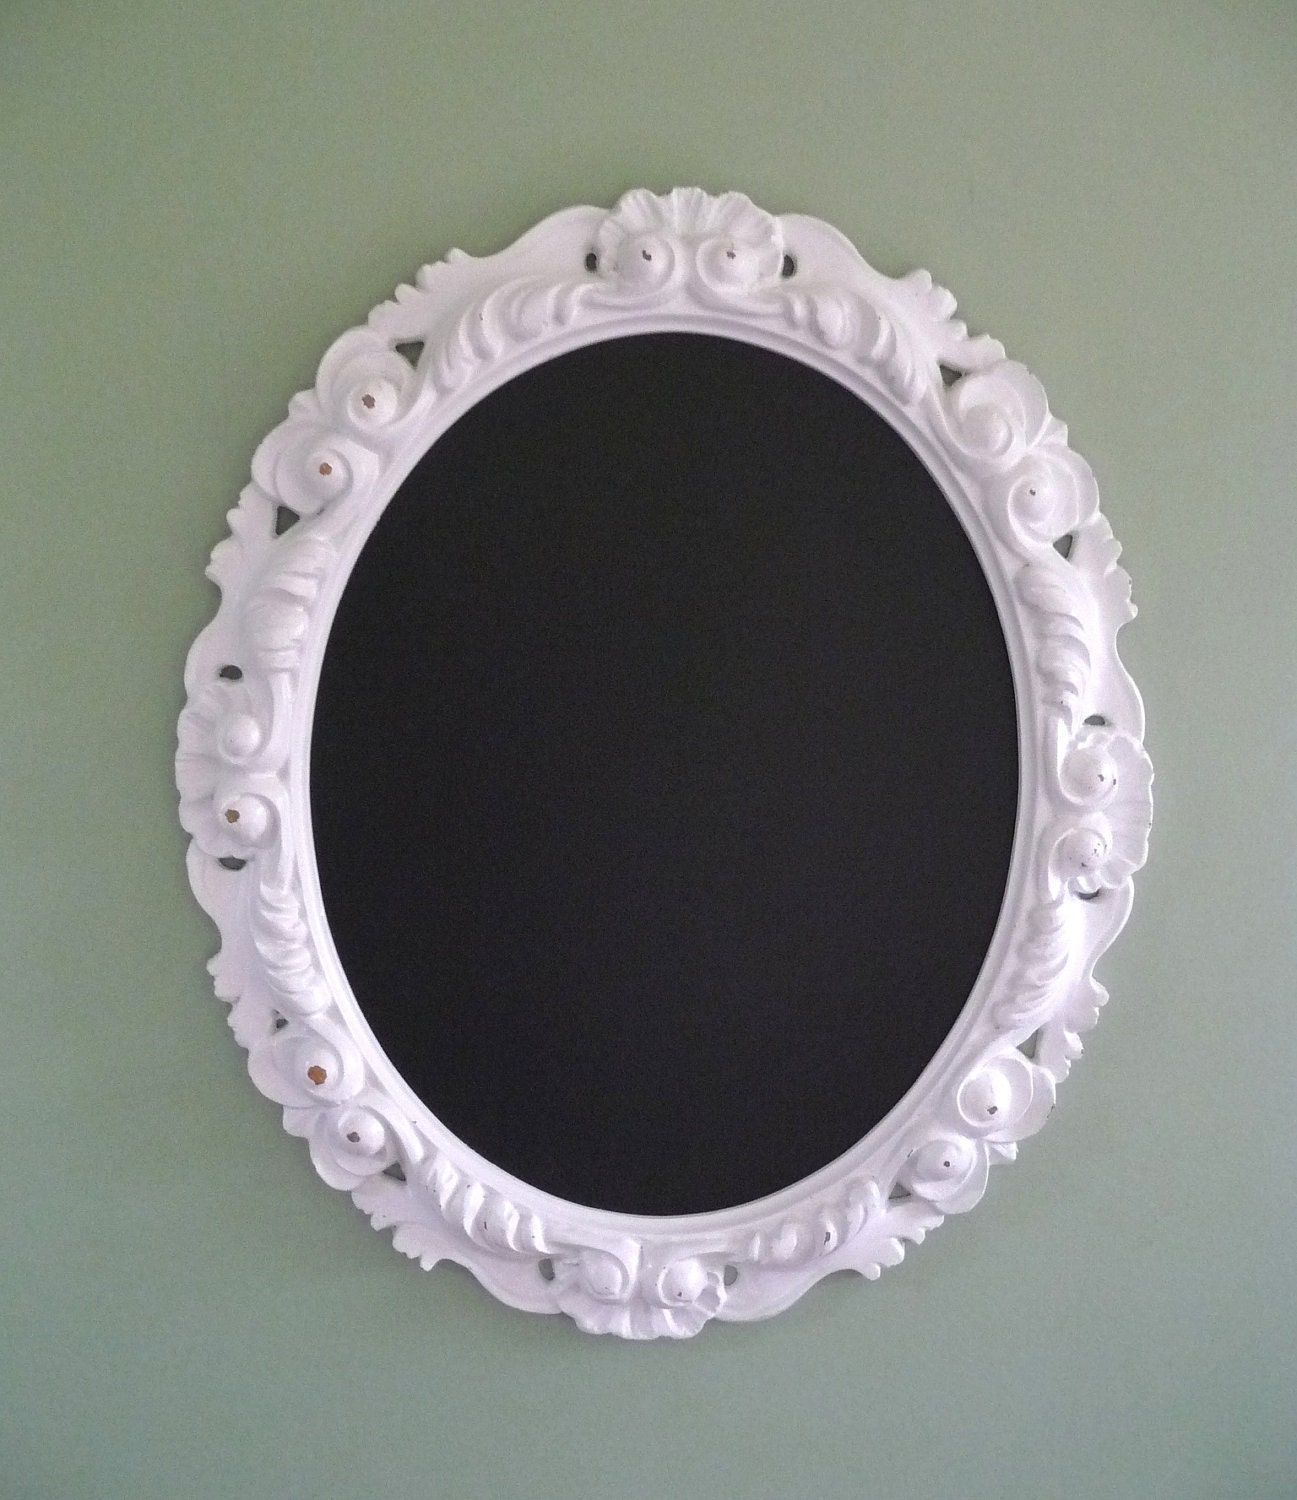 Download Oval Chalkboard with White Decorative Frame